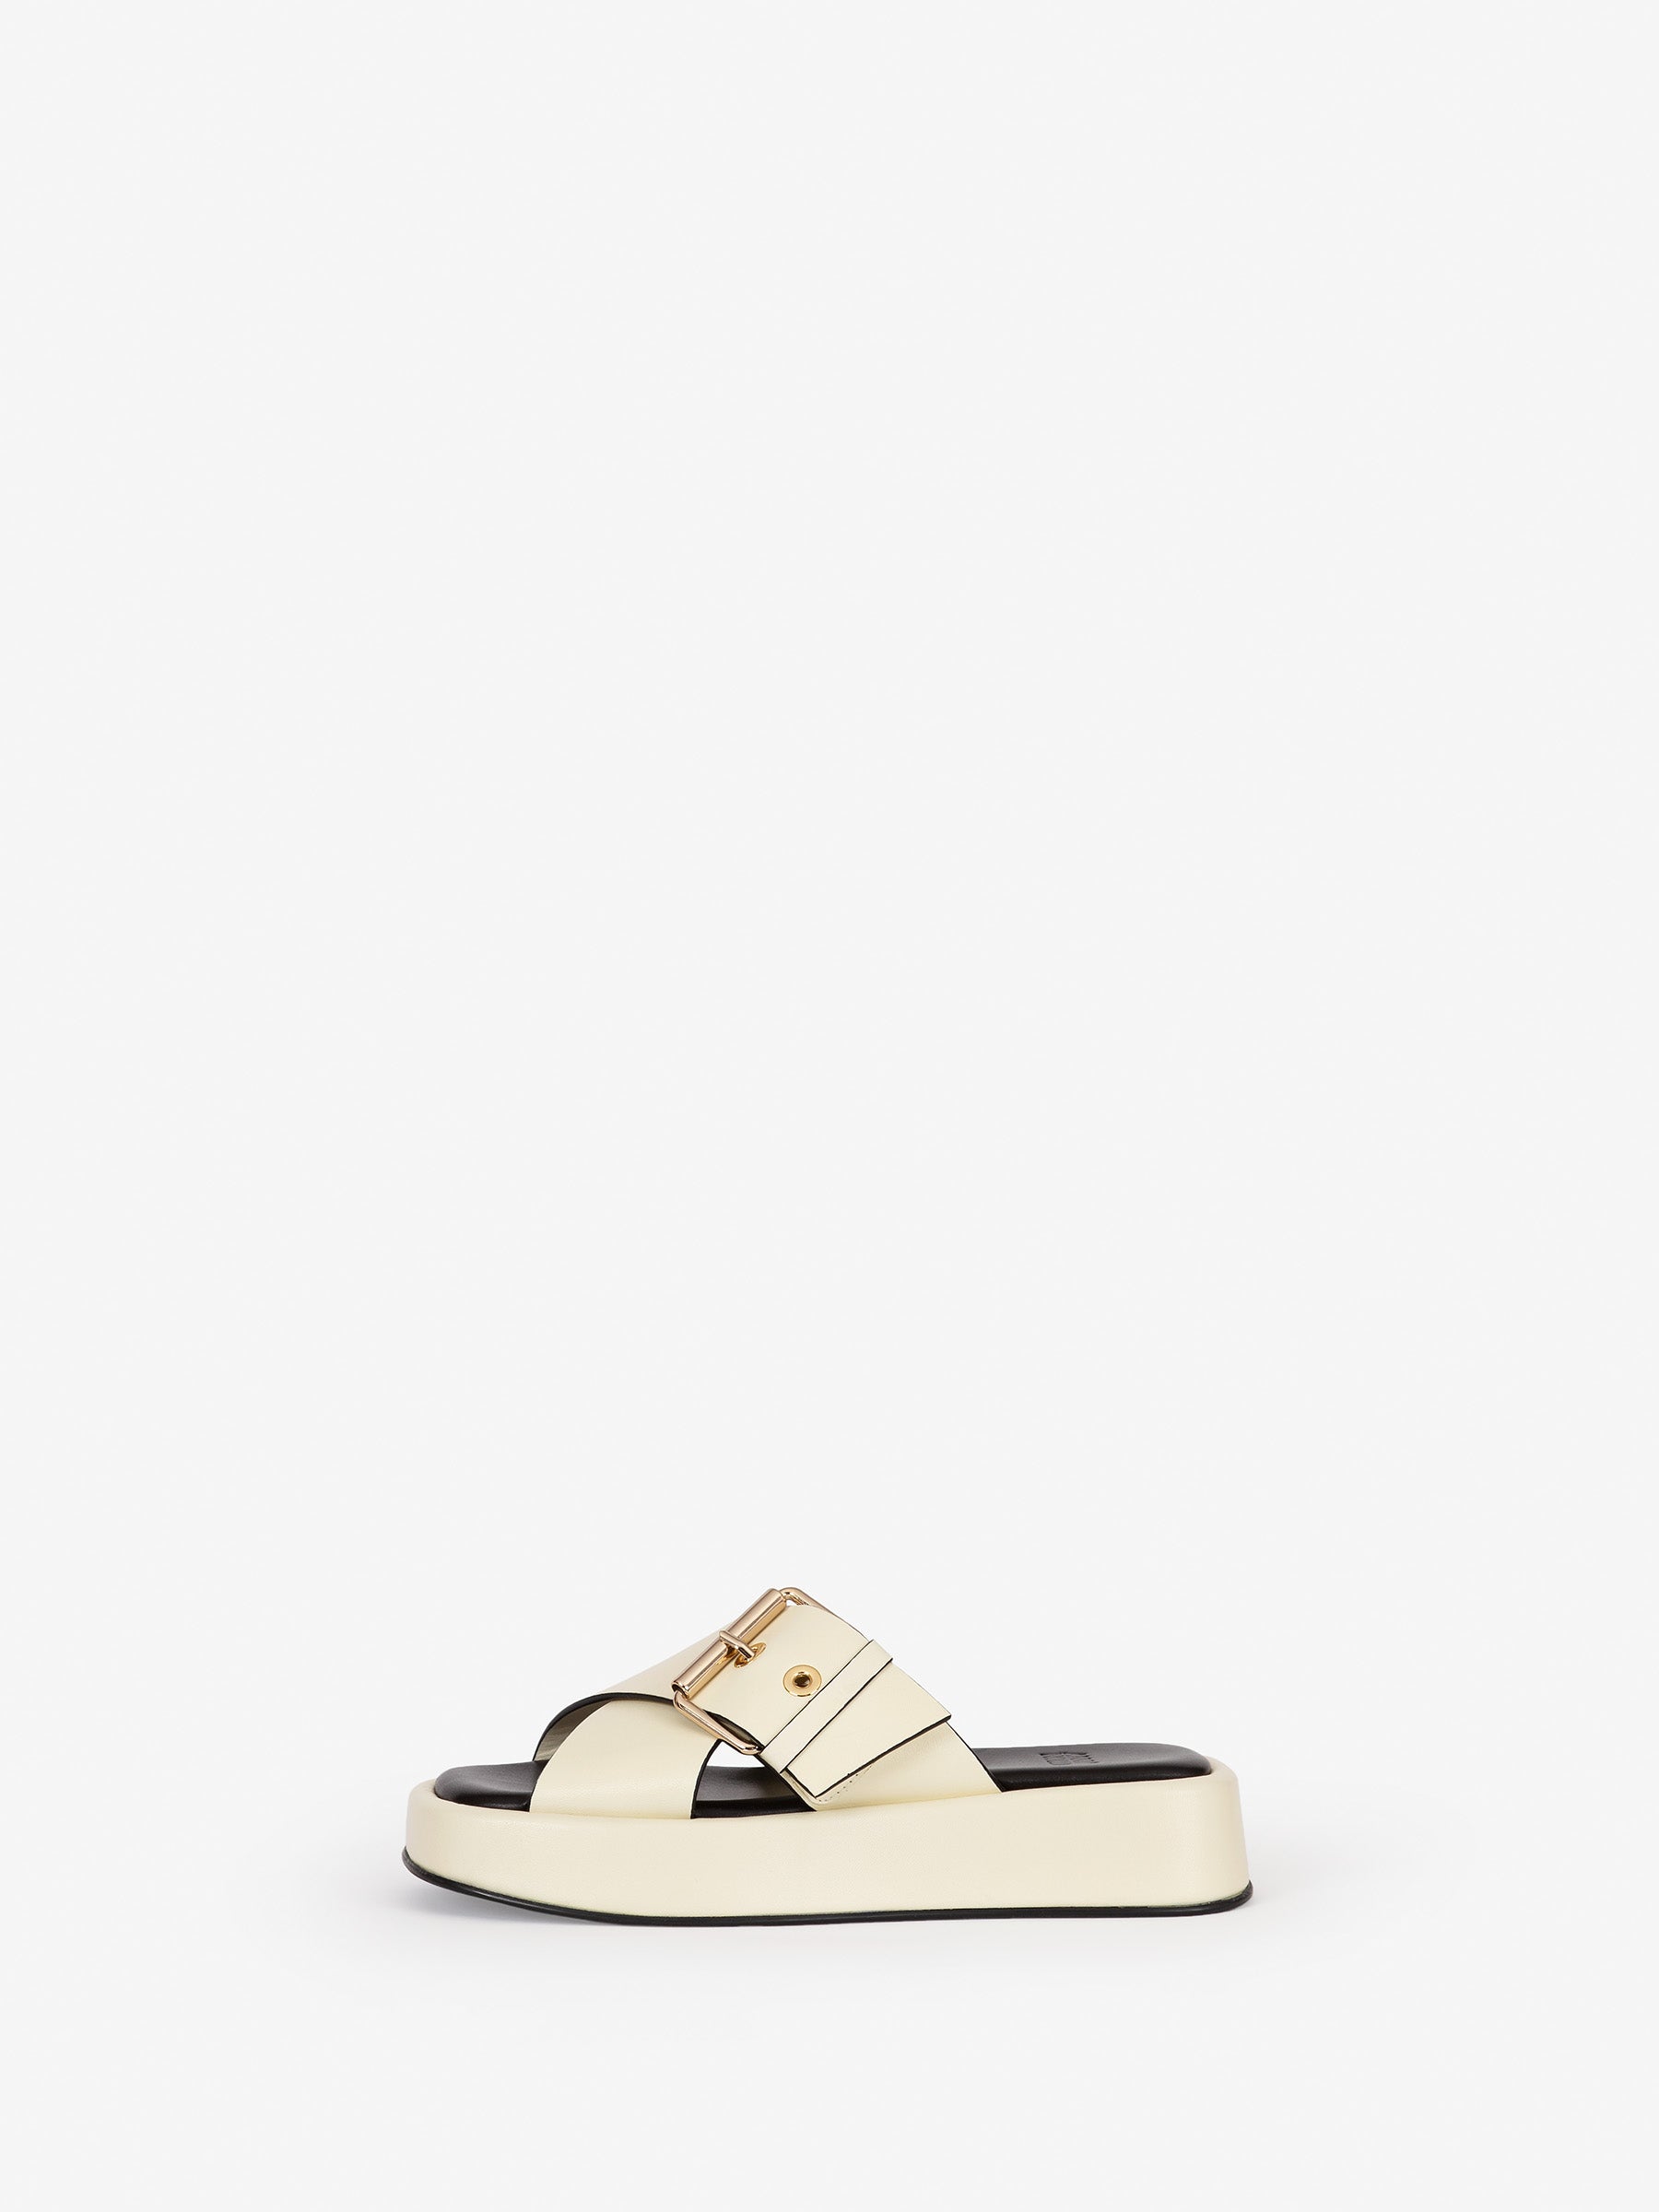 "DETOX" a chunky flatform sandal in vanilla/black combination, view from side